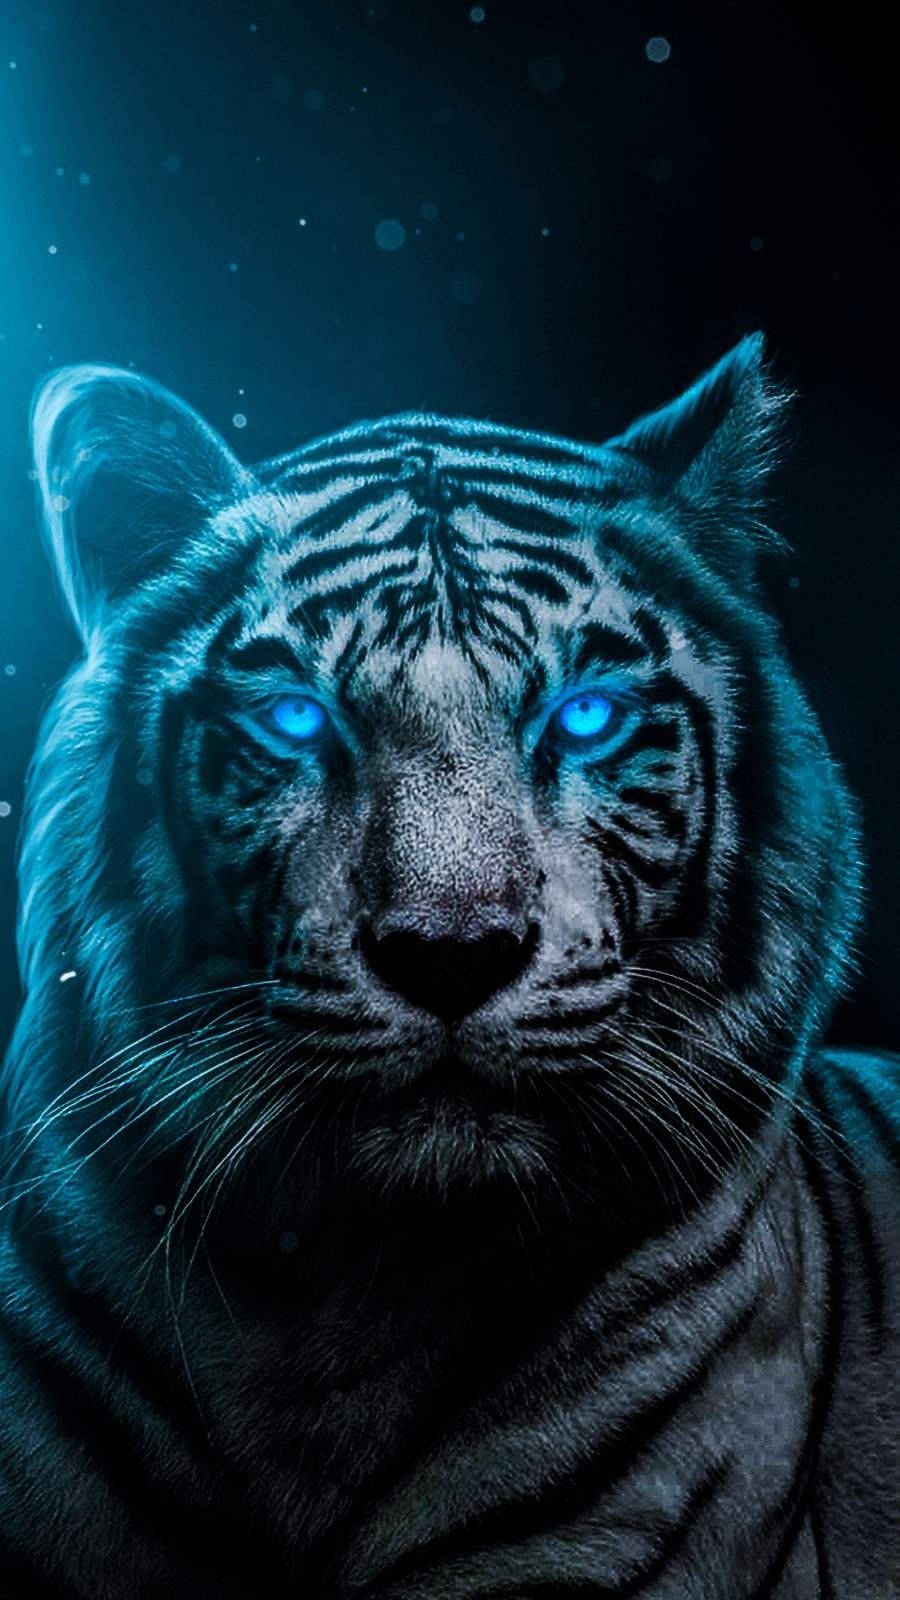 Majestic Blue-eyed Tiger For Iphone Wallpaper Wallpaper